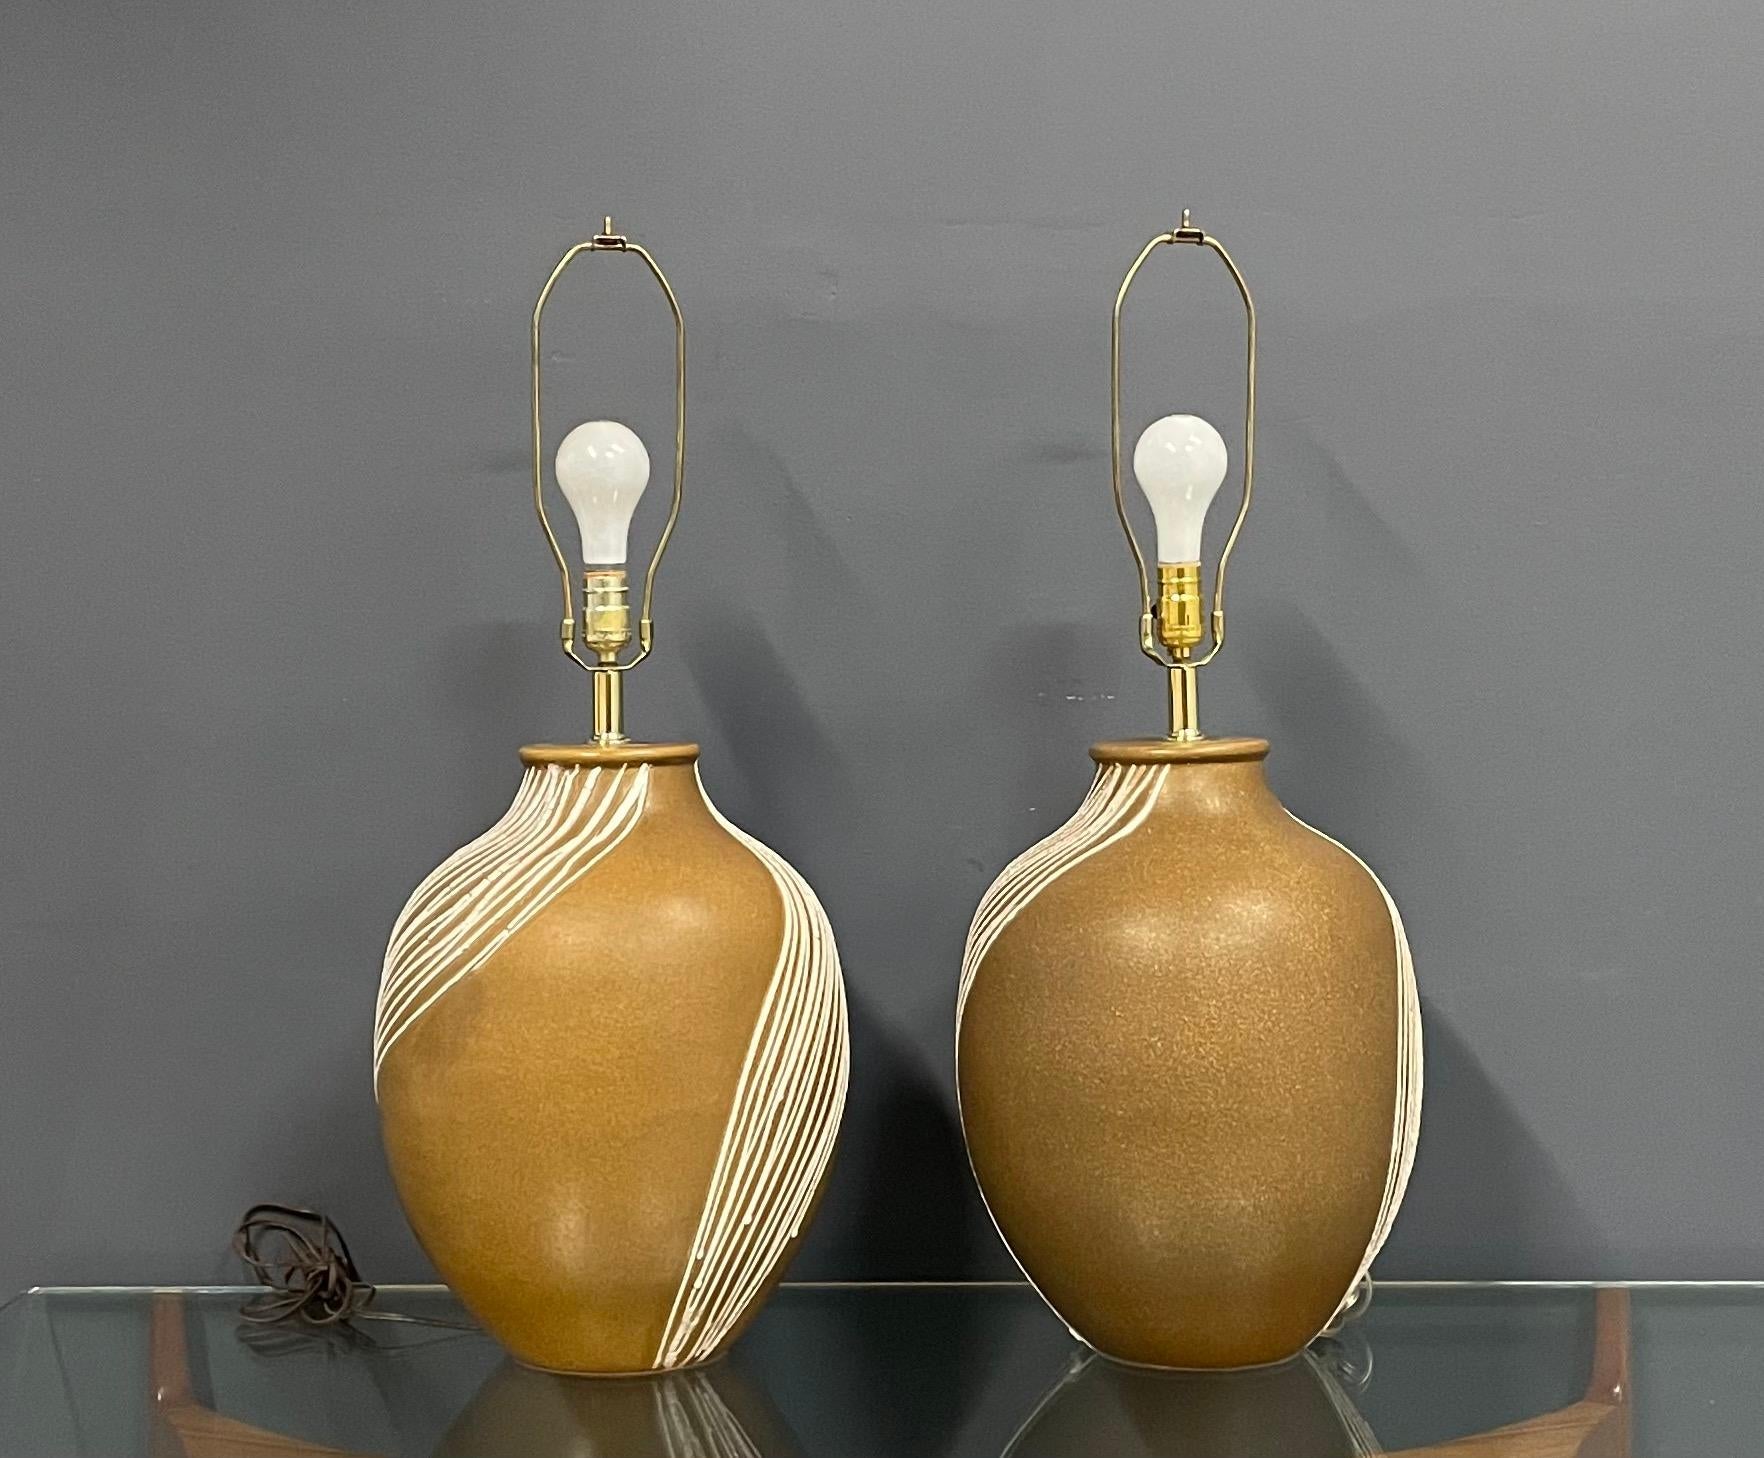 Mid Century Pair of Ceramic Caramel Colored Lamps with White Appliquéd Stripes In Good Condition For Sale In Philadelphia, PA